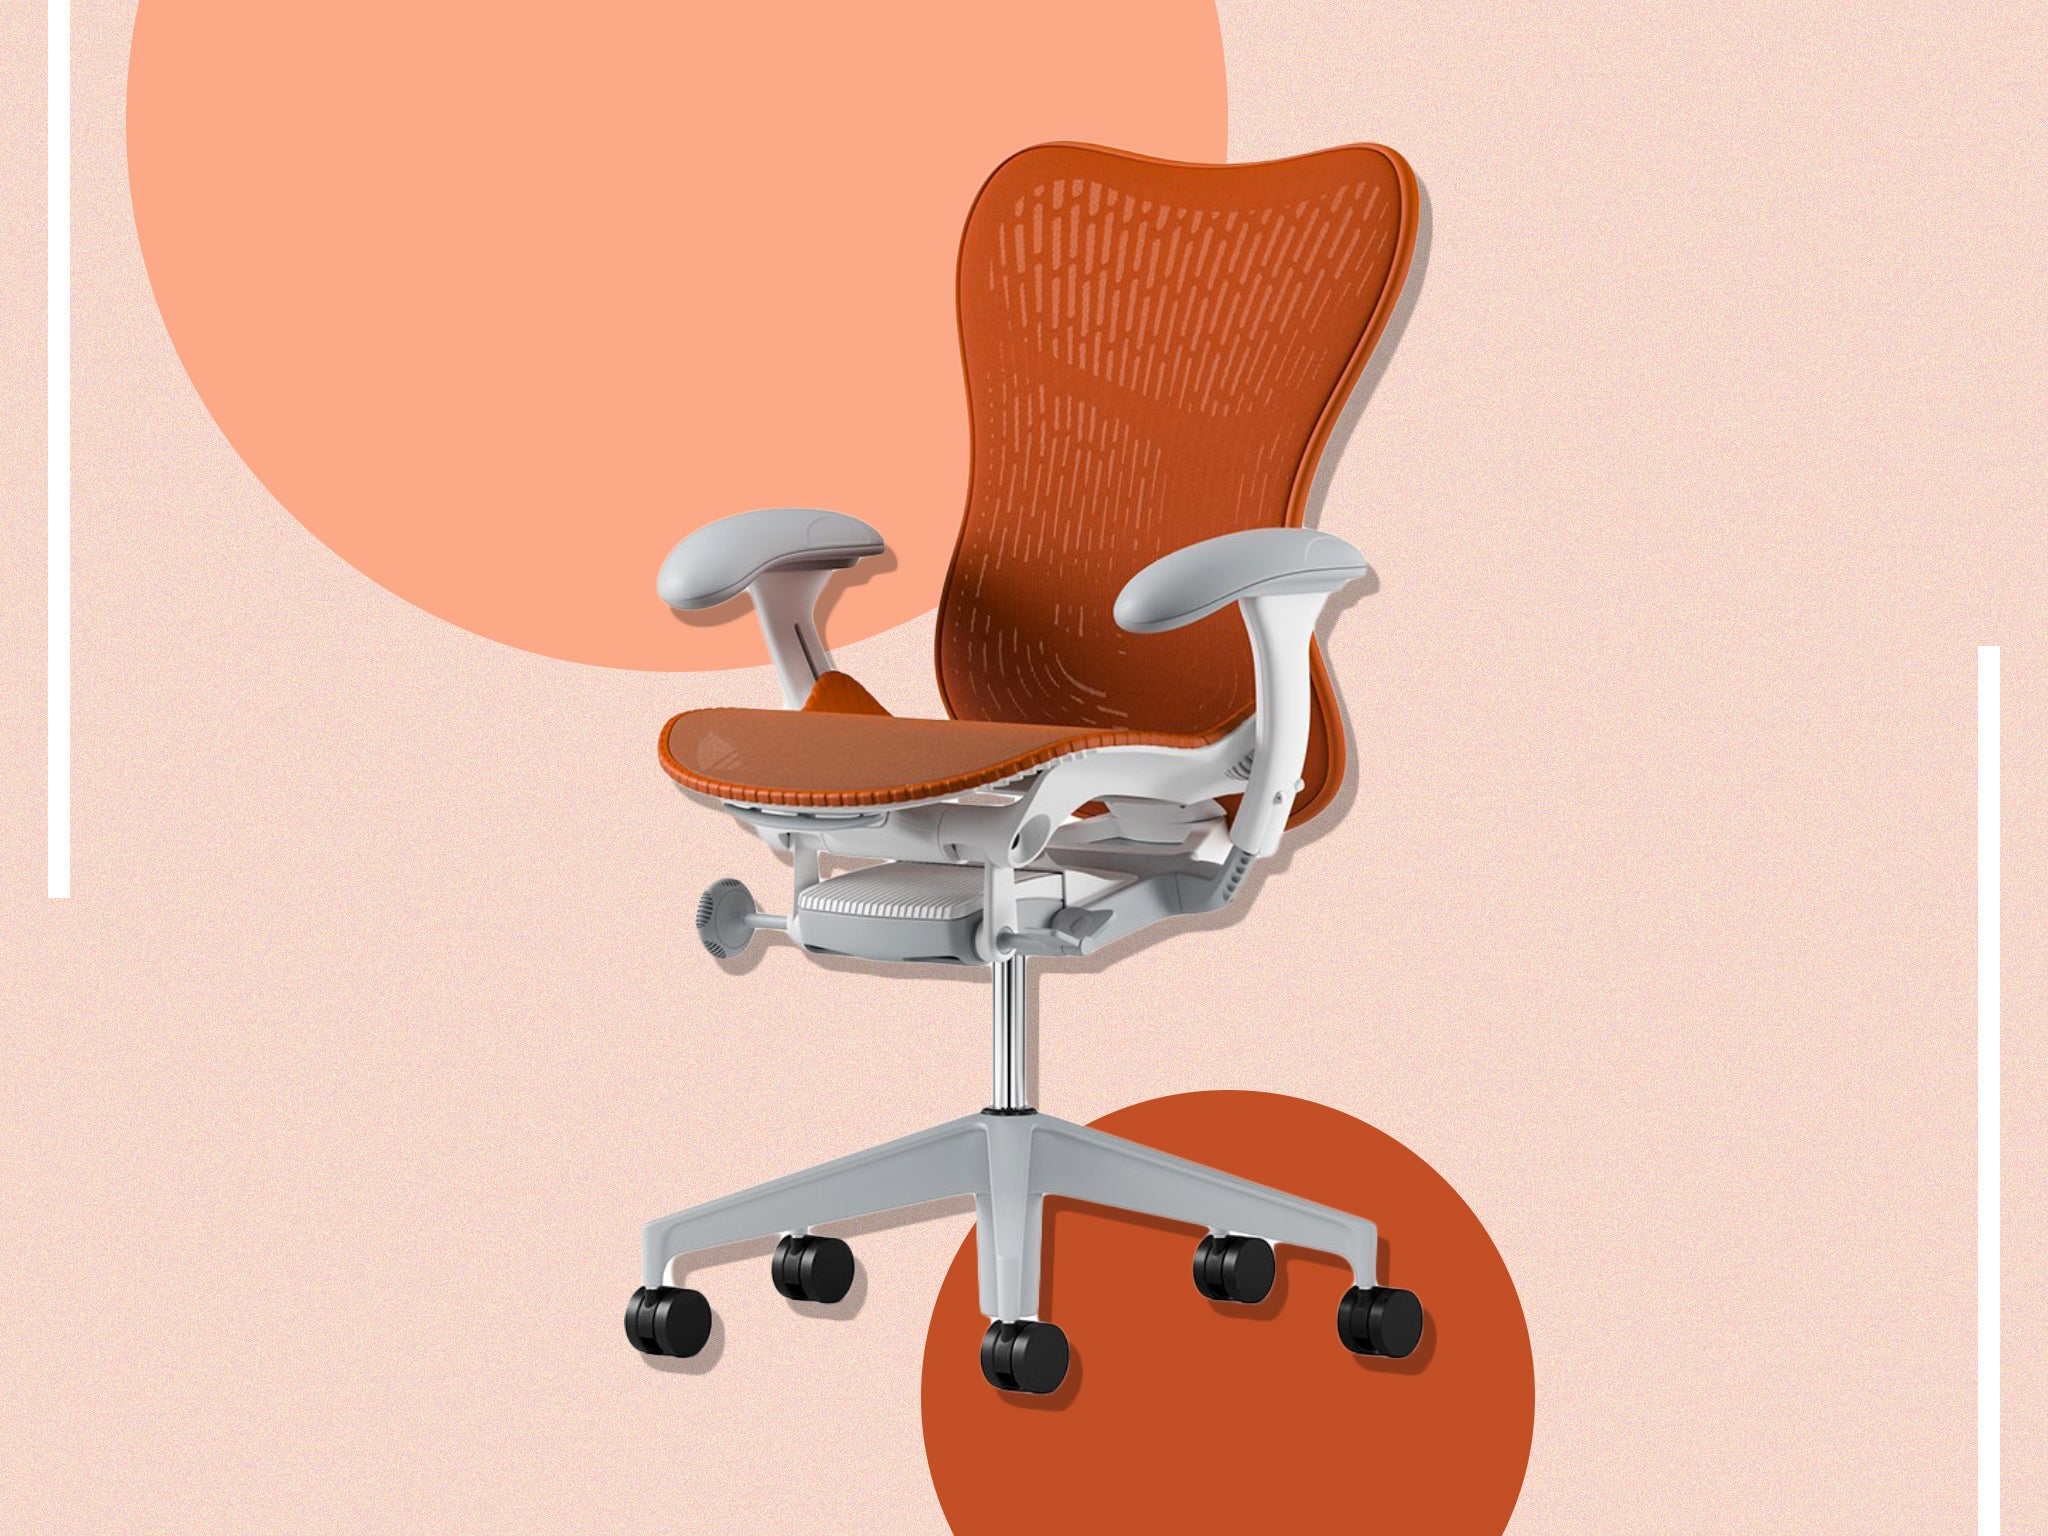 Its ergonomic design and modern looks make this a near perfect sitting machine if you’re working from home